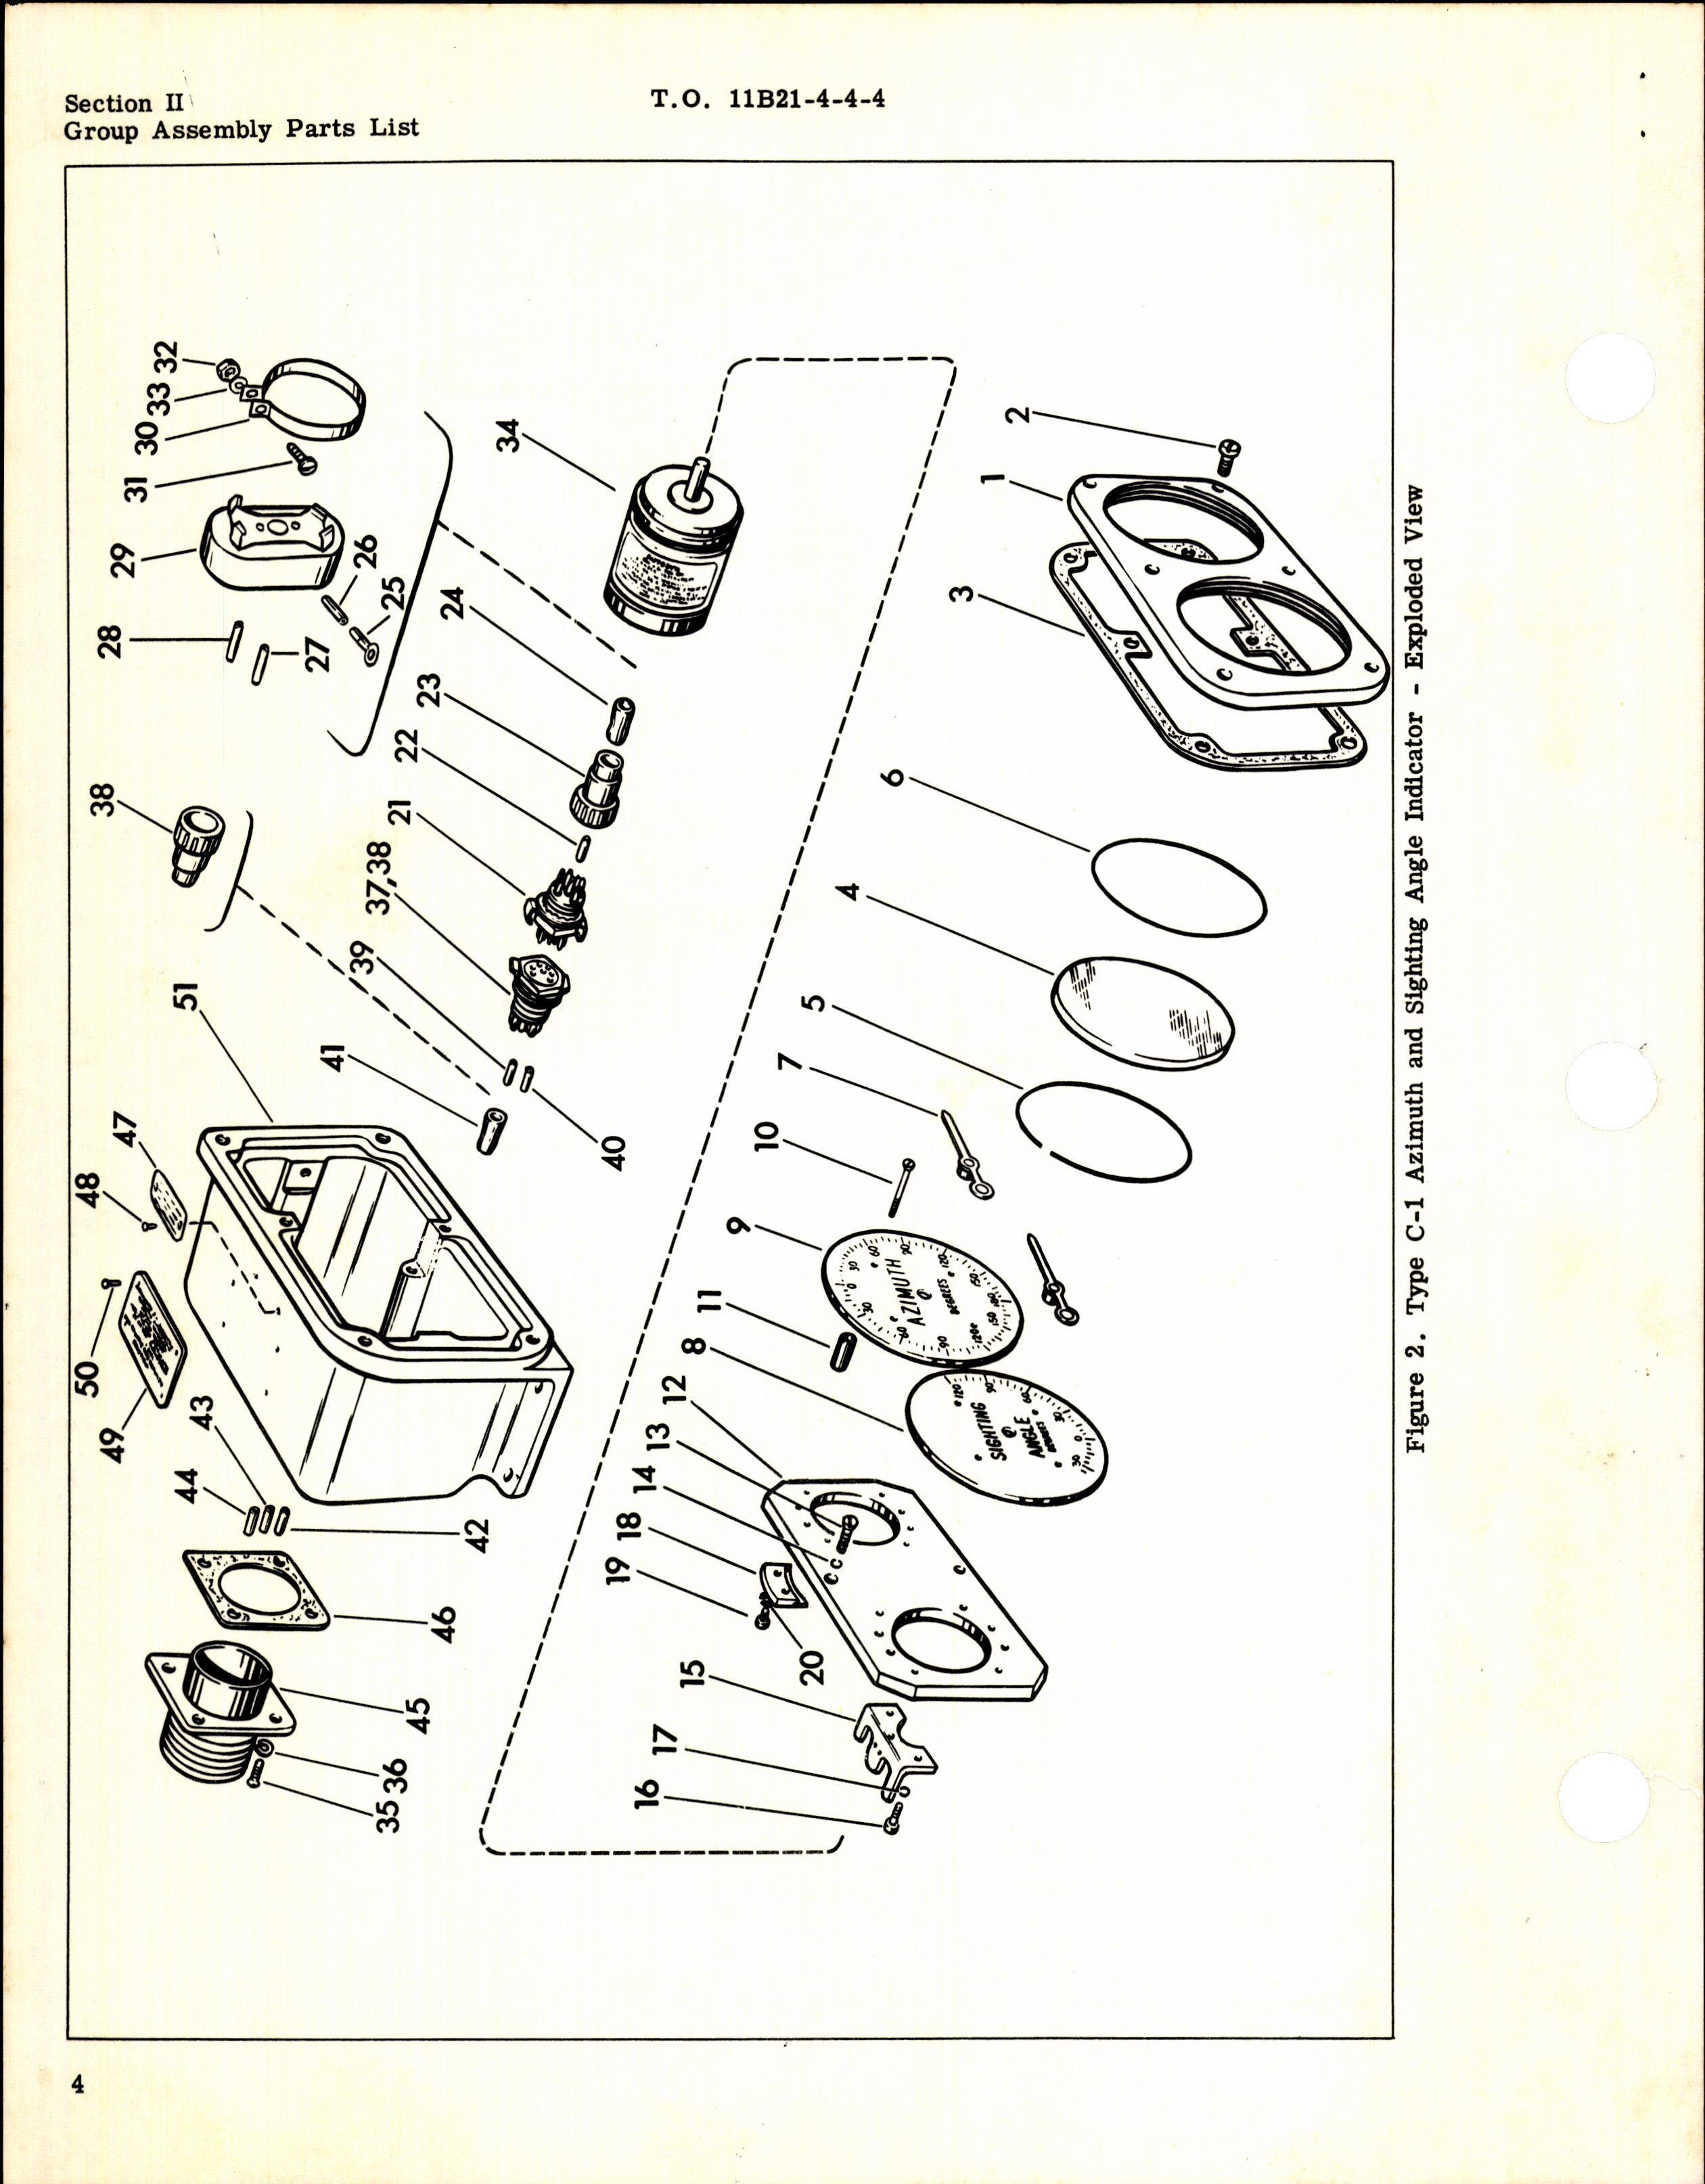 Sample page 6 from AirCorps Library document: Illustrated Parts Breakdown for General Mills Azimuth & Sighting Angle Indicator